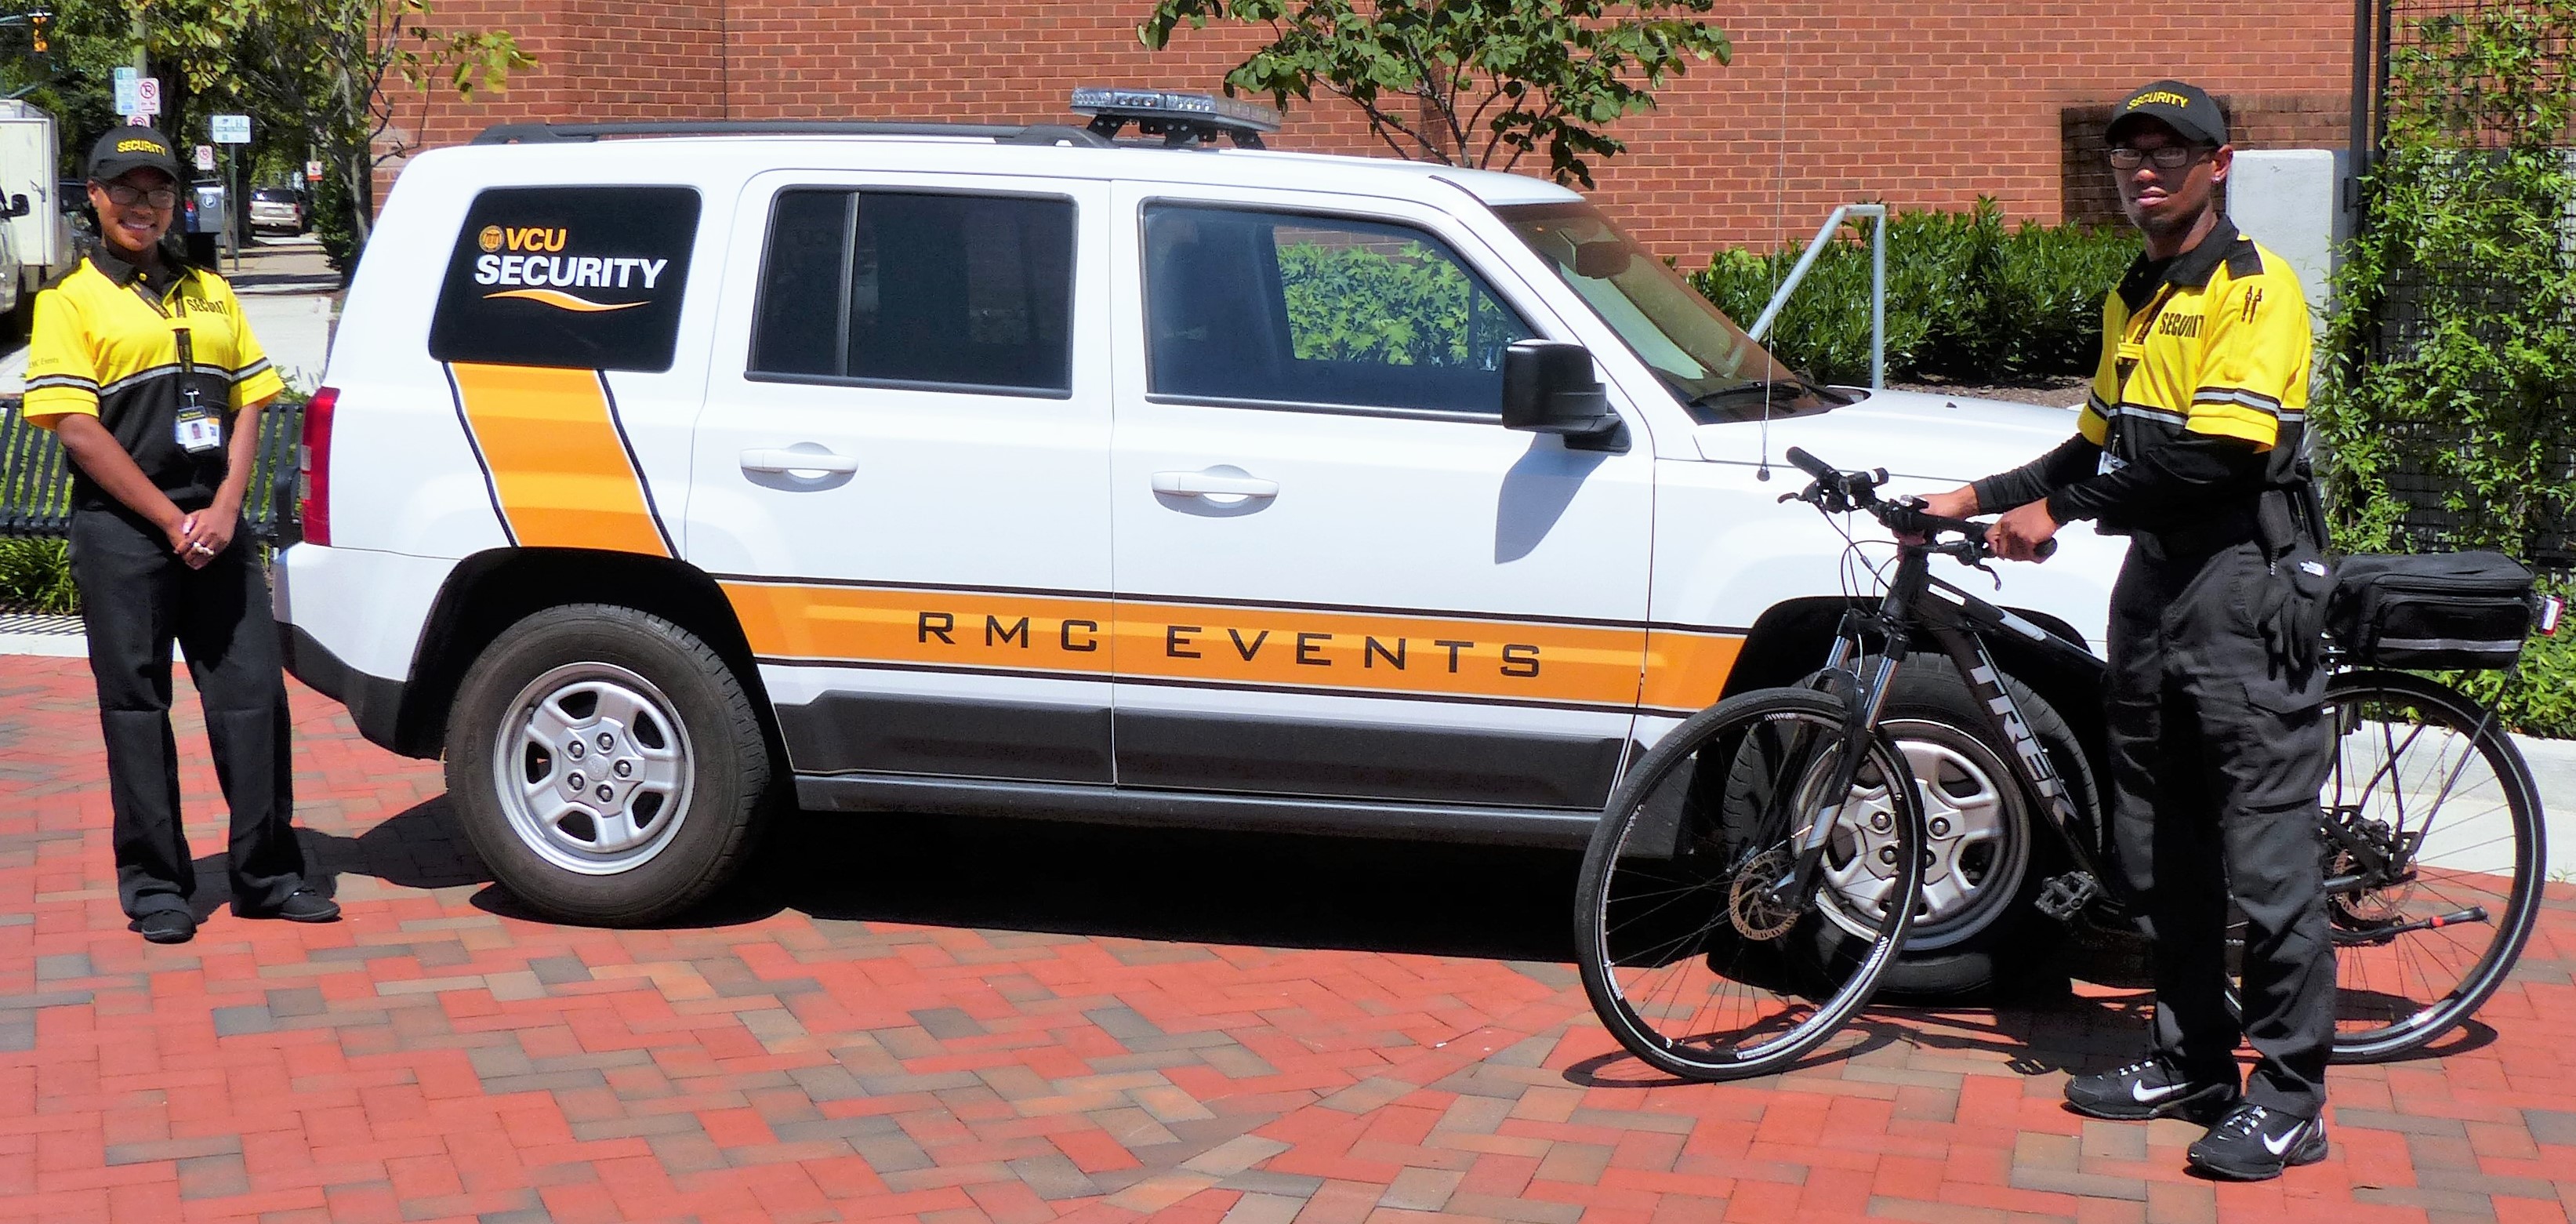 Image of a parked RMS / VCU Security vehicle